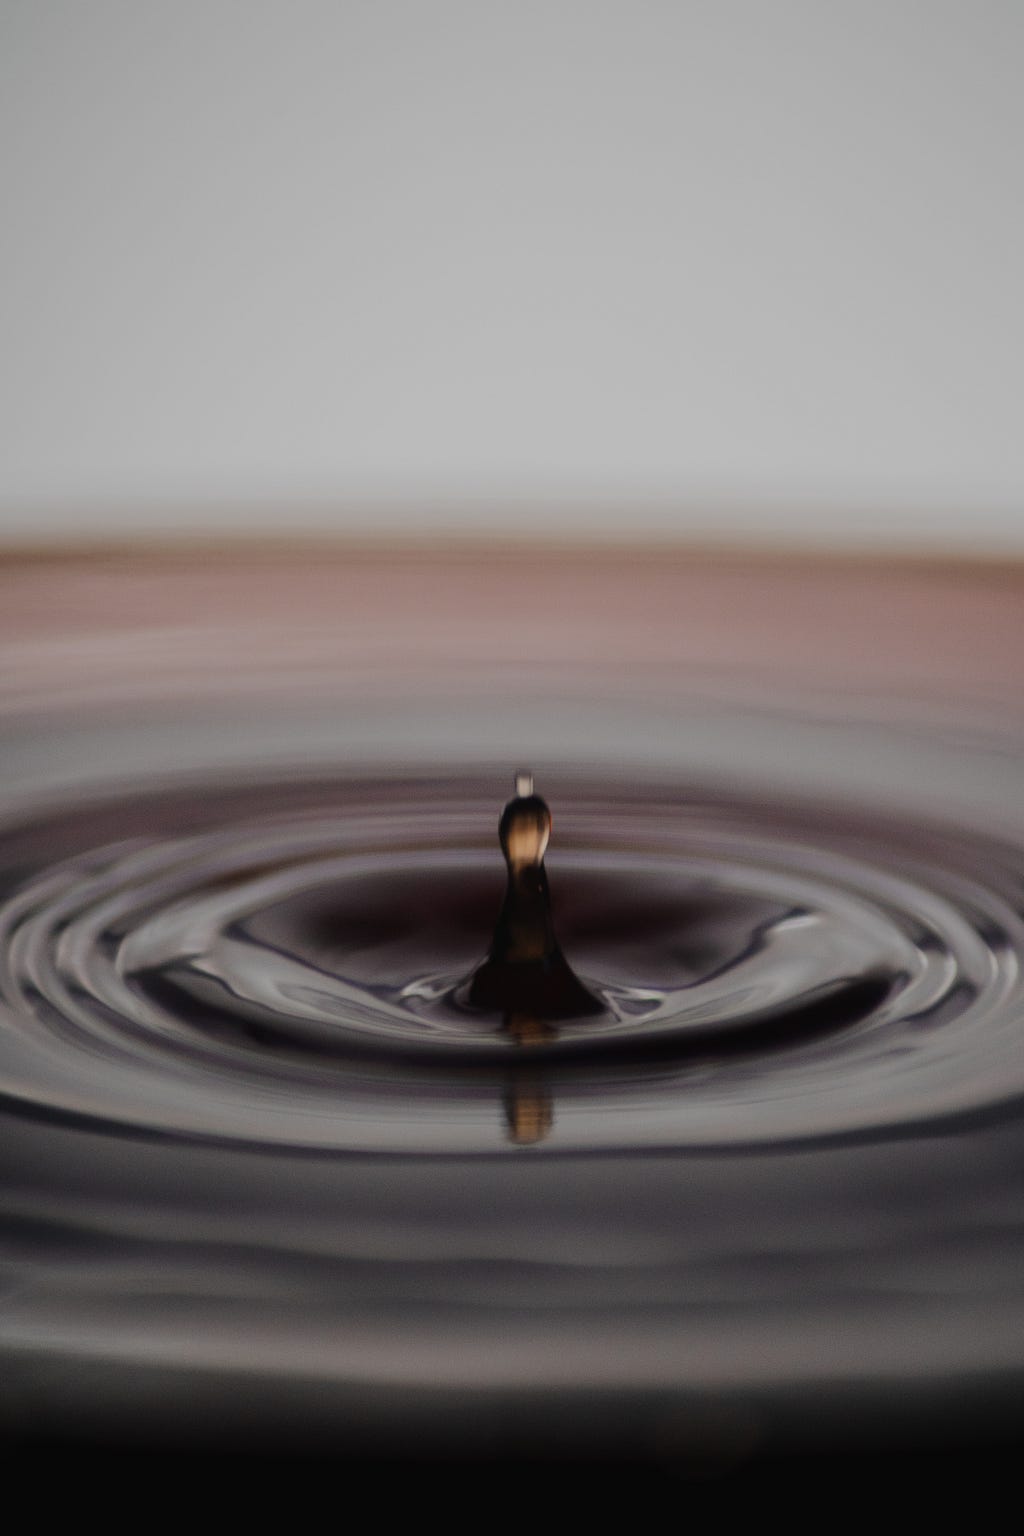 A drop of water rebounding from a pool after it hits.